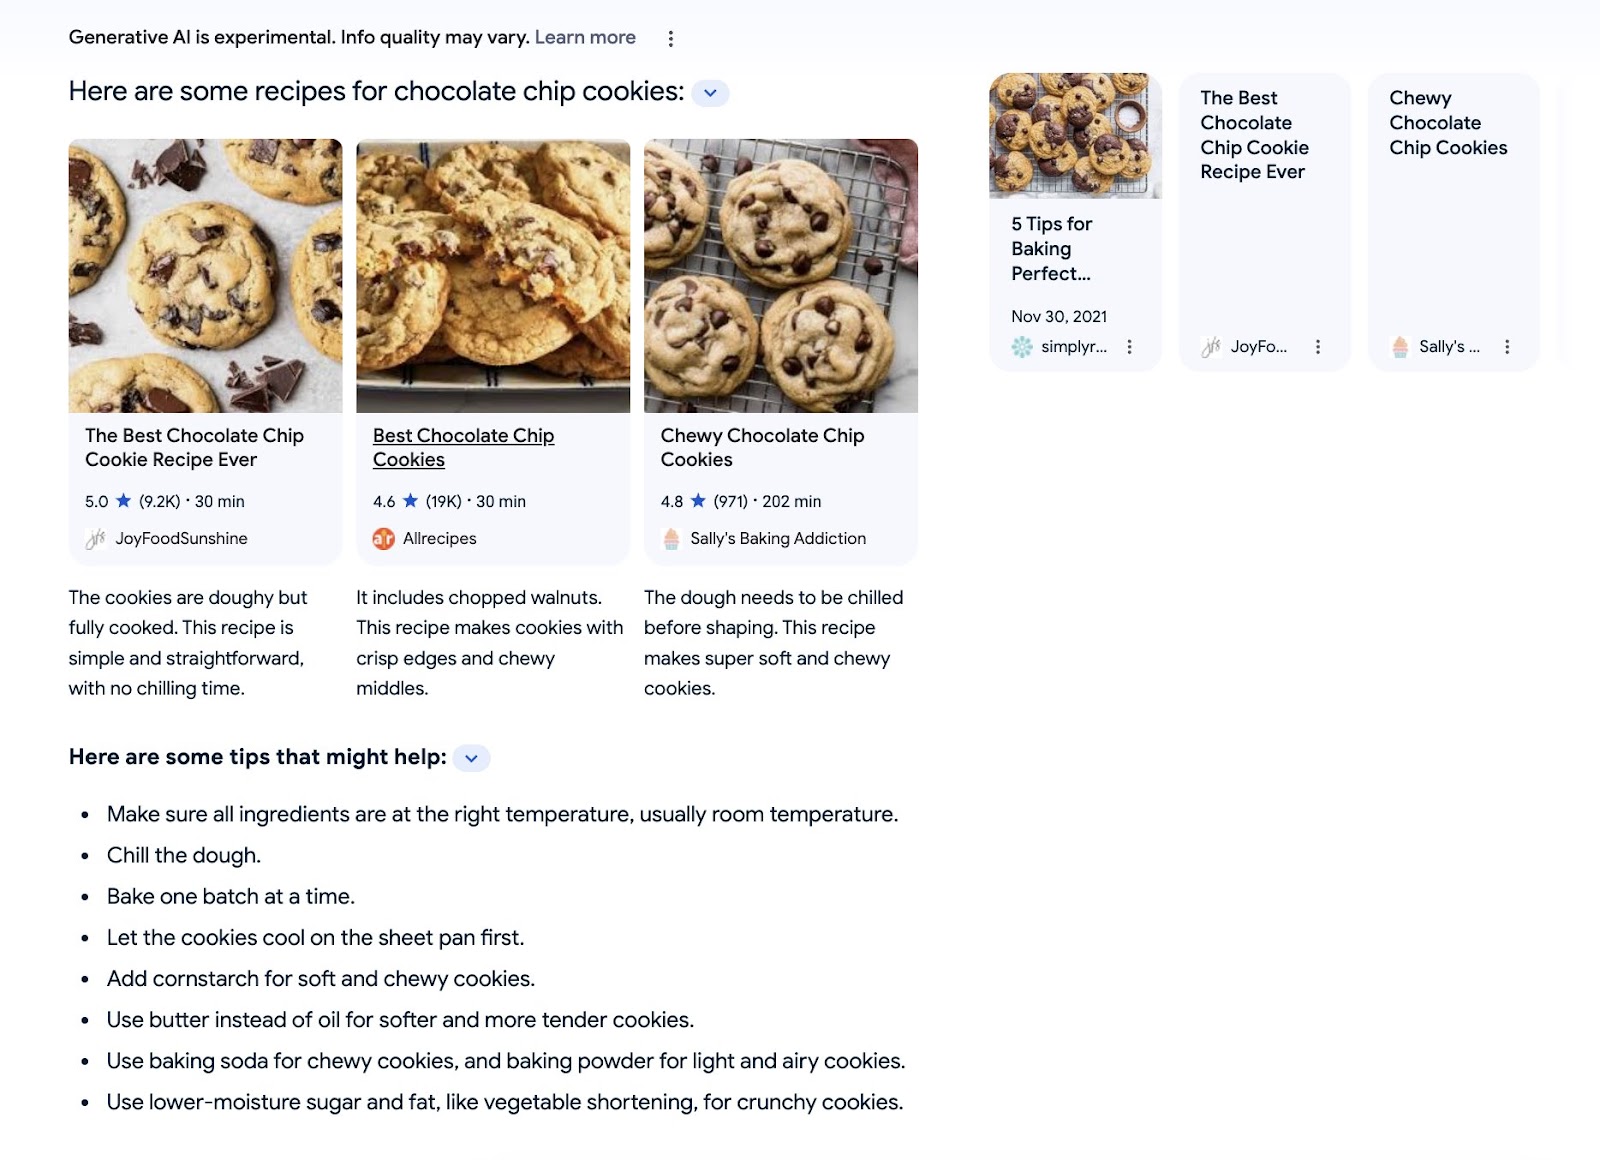 Google SGE results for “best chocolate chip cookie recipe"